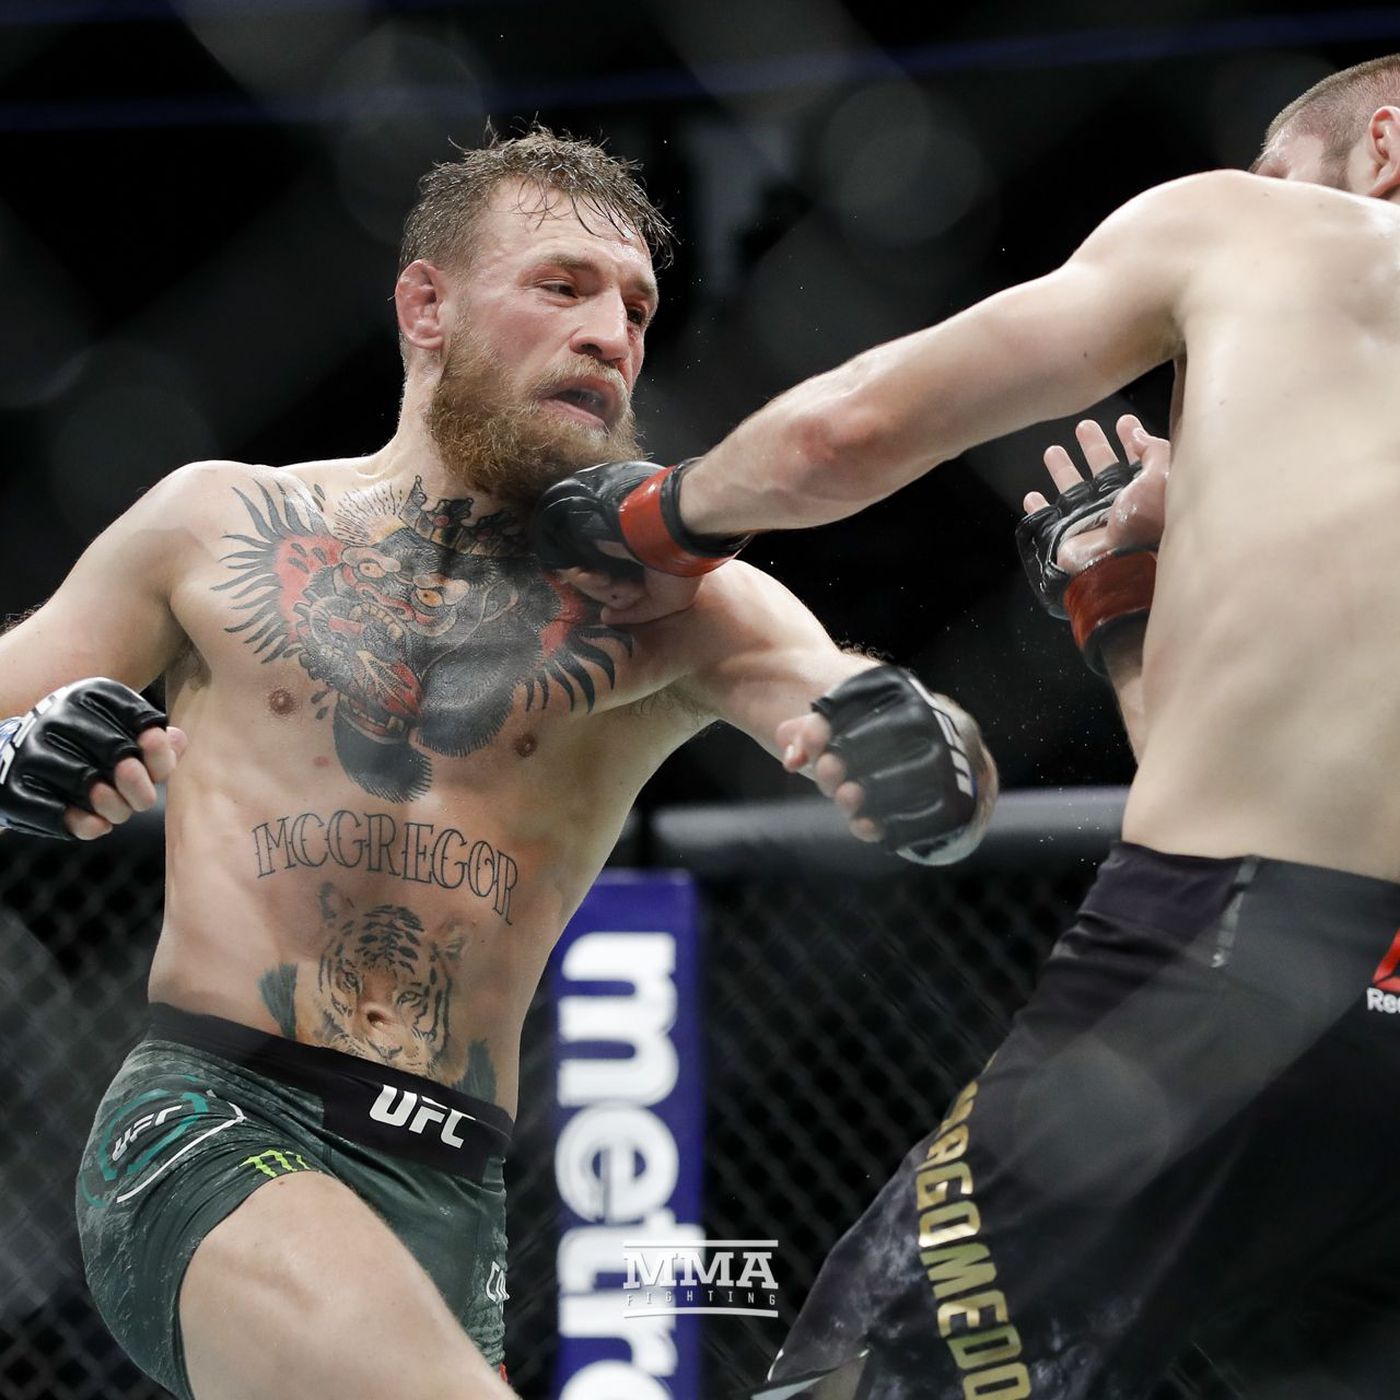 Conor McGregor back at retired Khabib Nurmagomedov: 'Your fear of defeat means you've already lost' - MMA Fighting